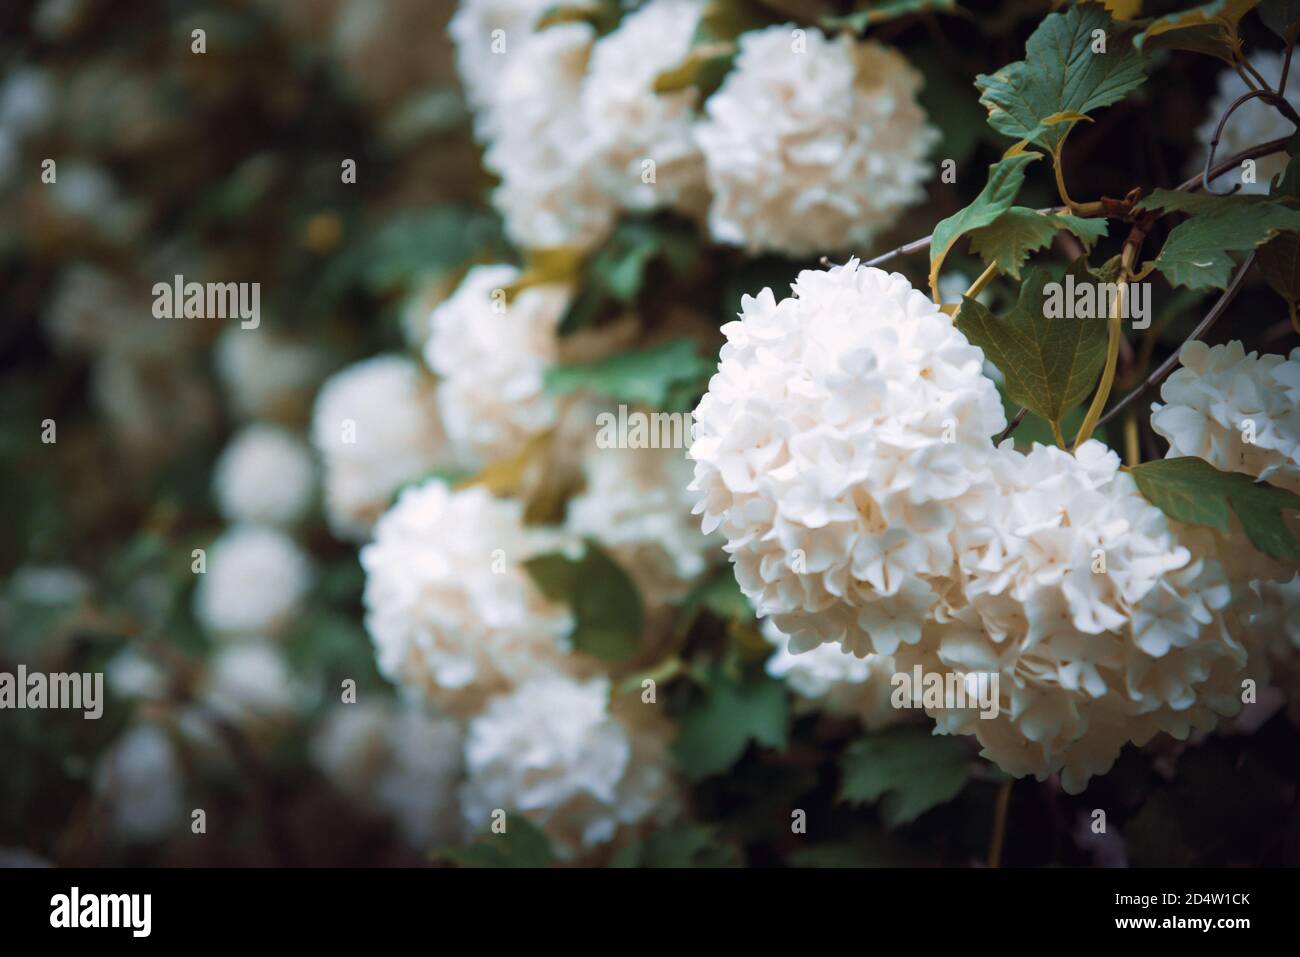 Globular large clusters of white flowers on tall bushes with green leaves. The flowering tree. Natural background. Stock Photo